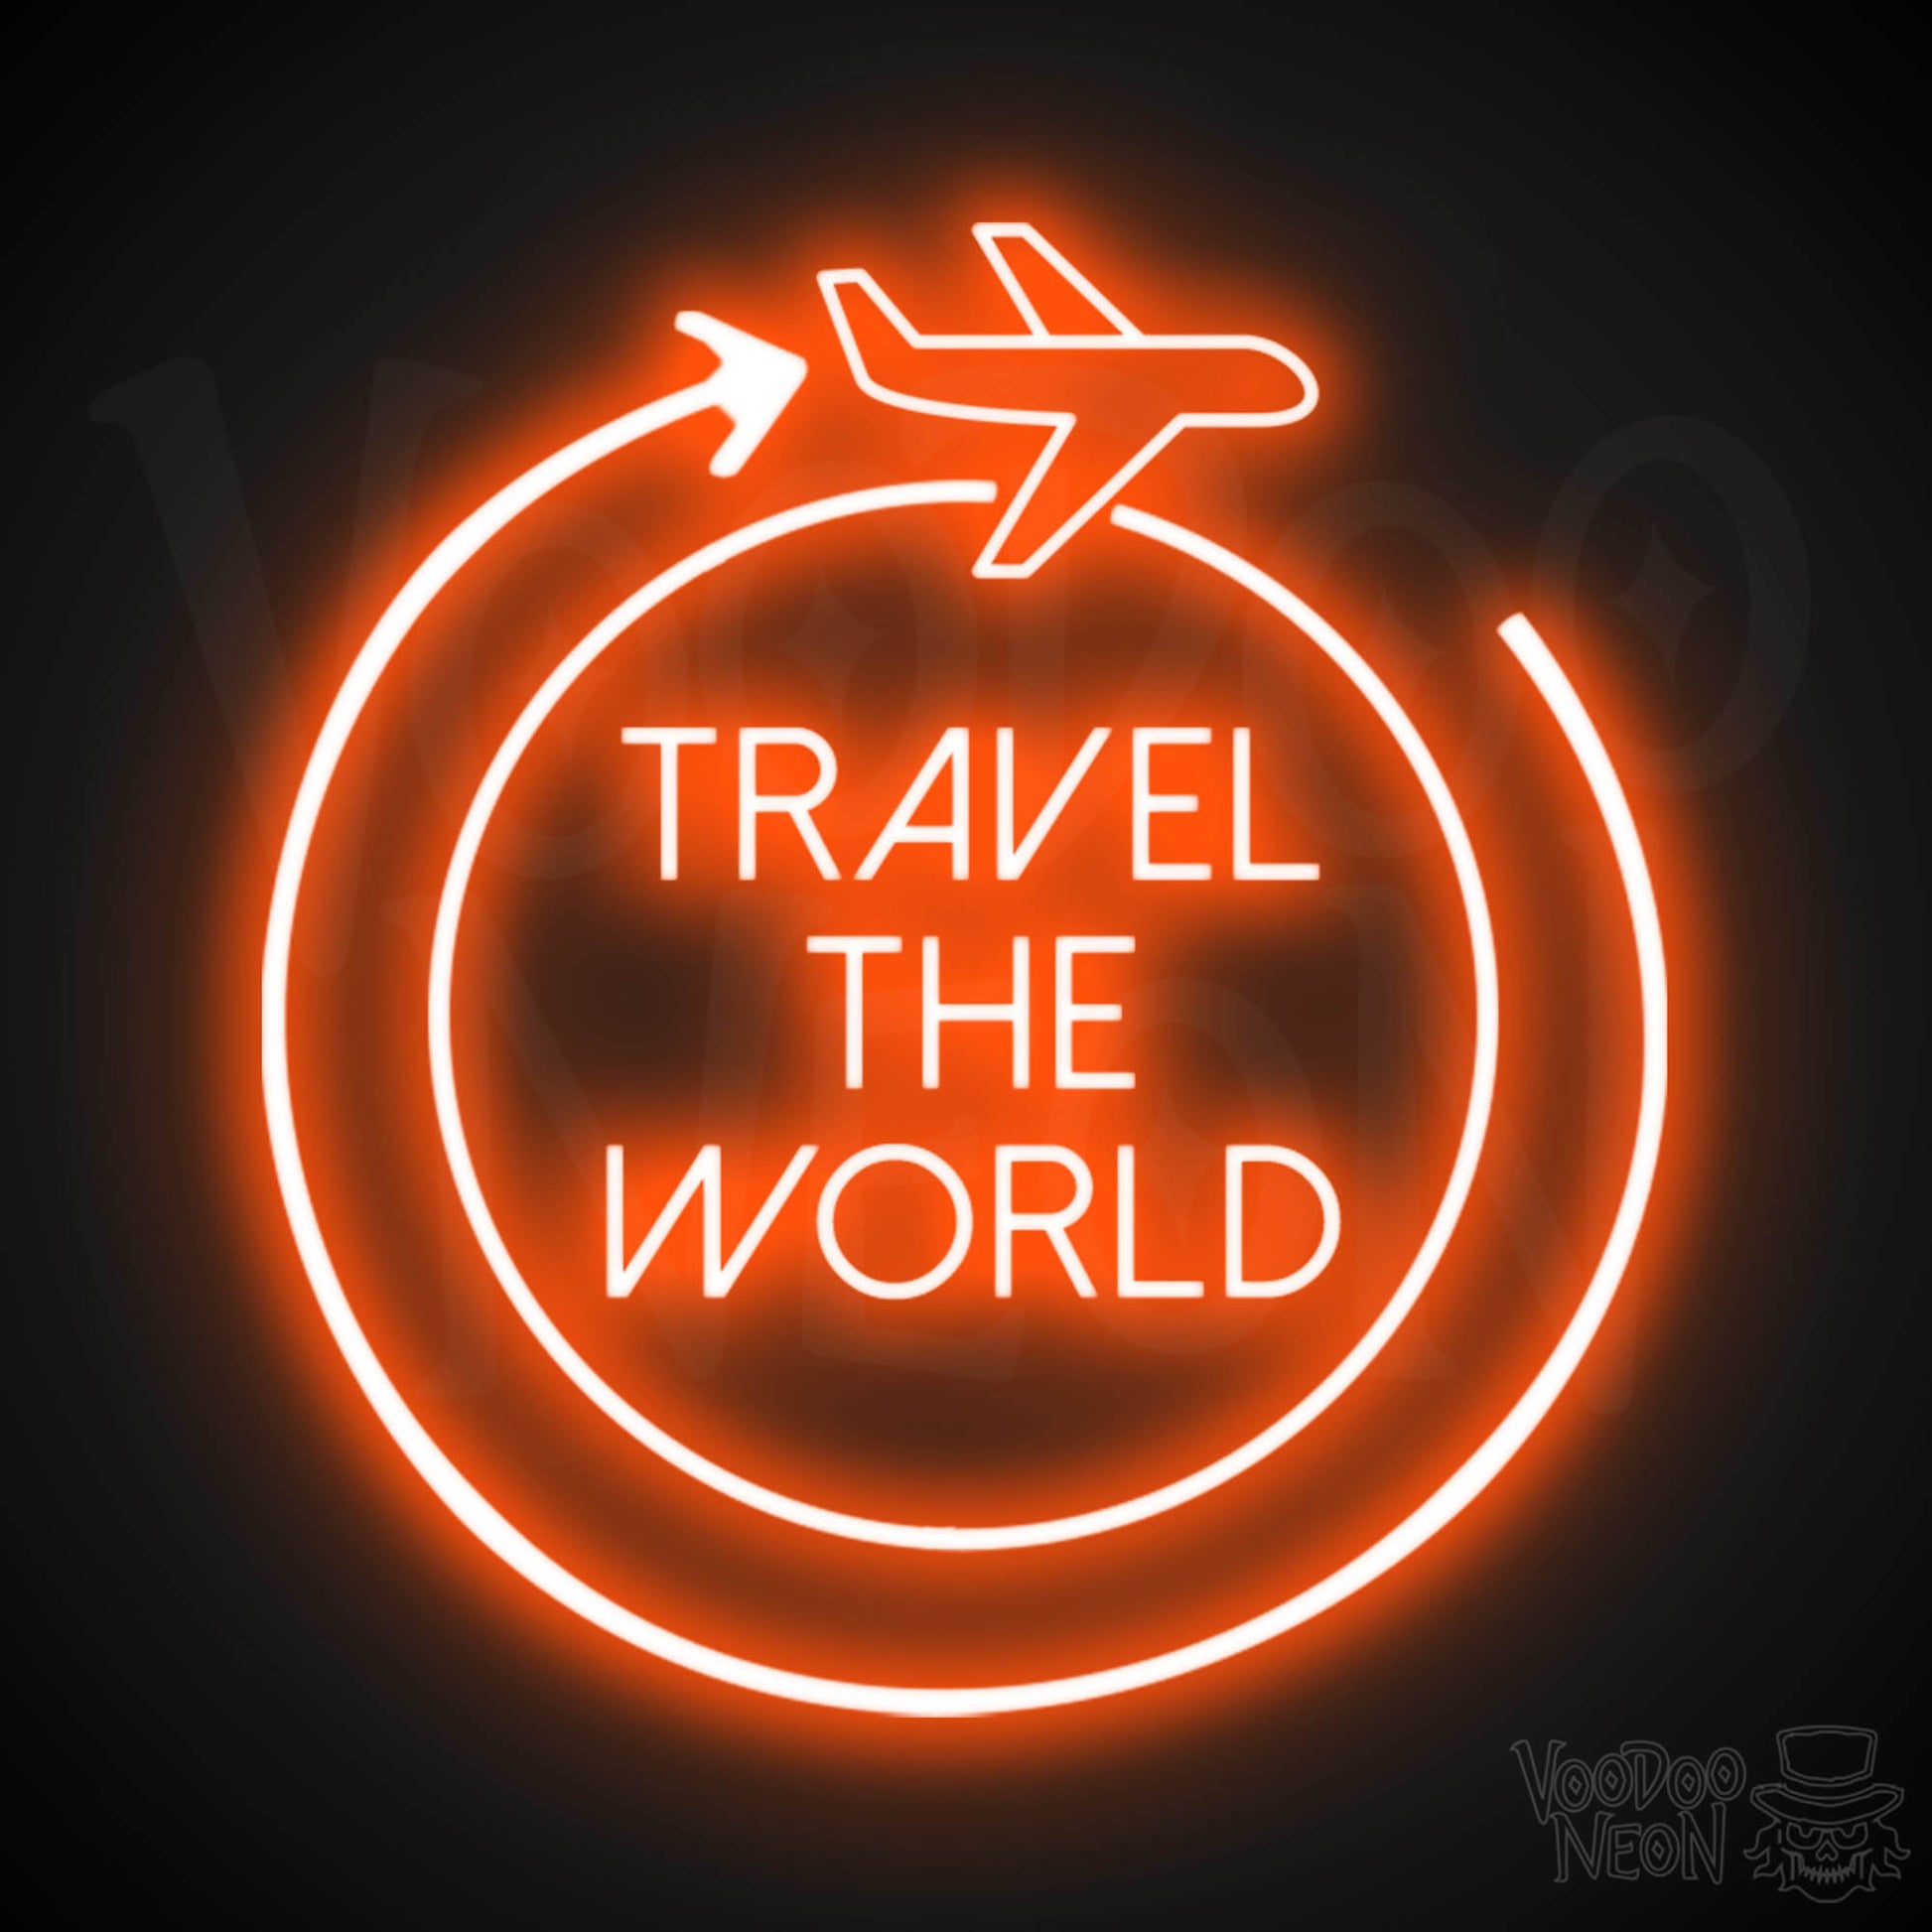 Let's Travel The World Neon Sign - LED Neon Wall Art - Color Orange